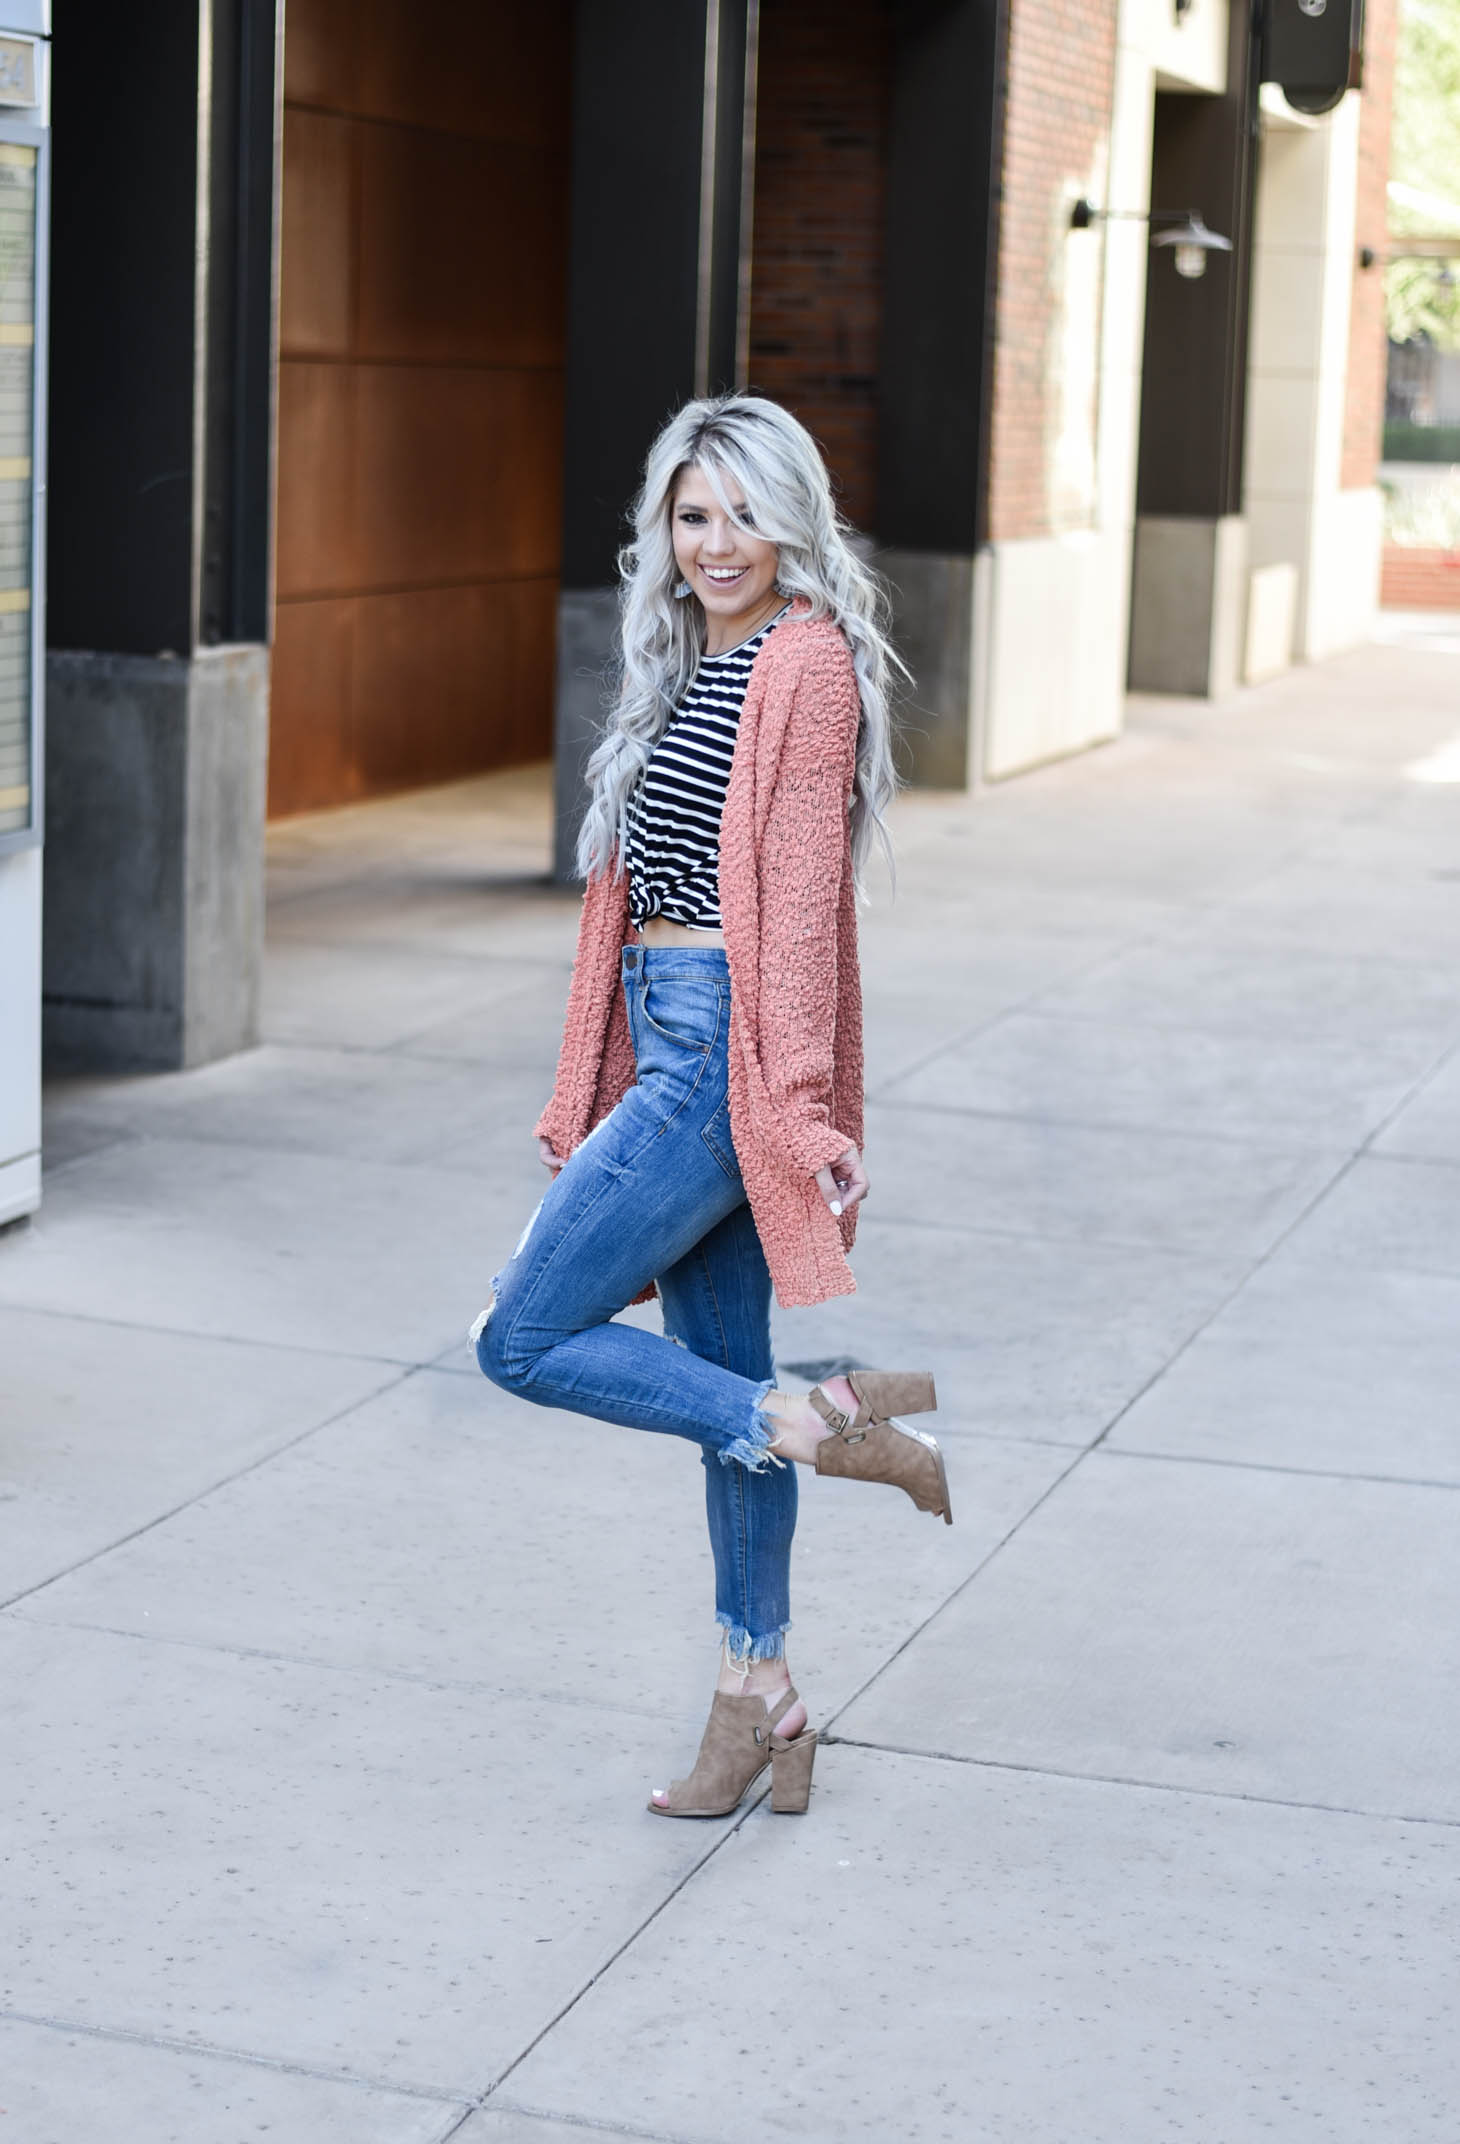 Erin Elizabeth of Wink and a Twirl shares two ways to style a striped top from Pink Lily Boutique perfect for your fall style this year